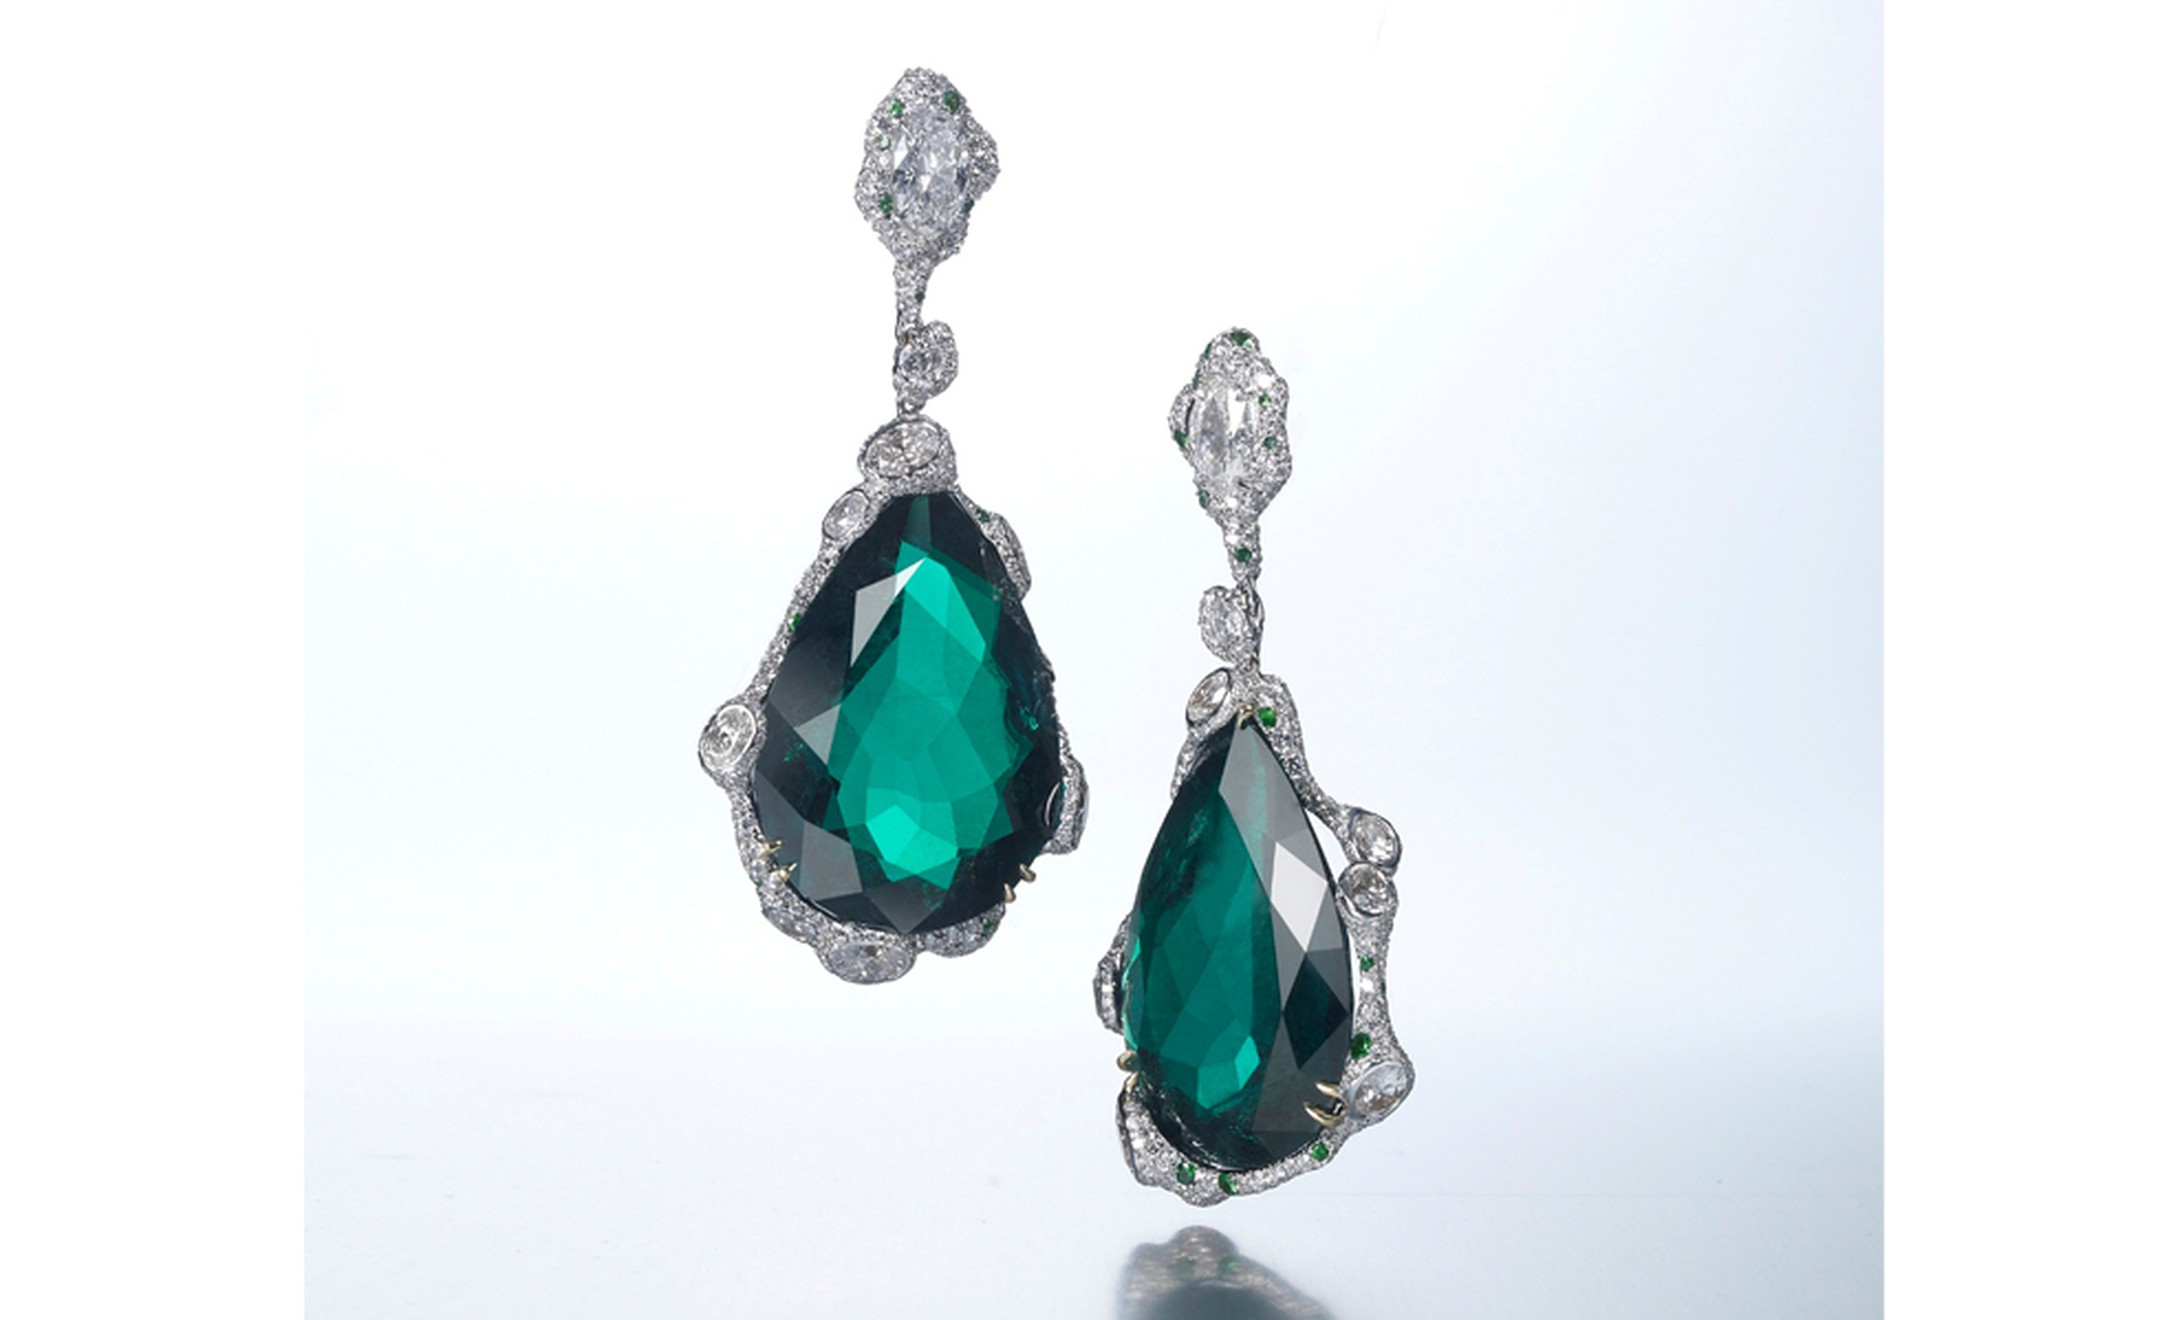 CINDY CHAO, The Art Jewel, Black Label Masterpiece Emerald Drop Earrings. Drop earrings with emerald (63cts) highlighted by diamonds set in 18kt white gold.